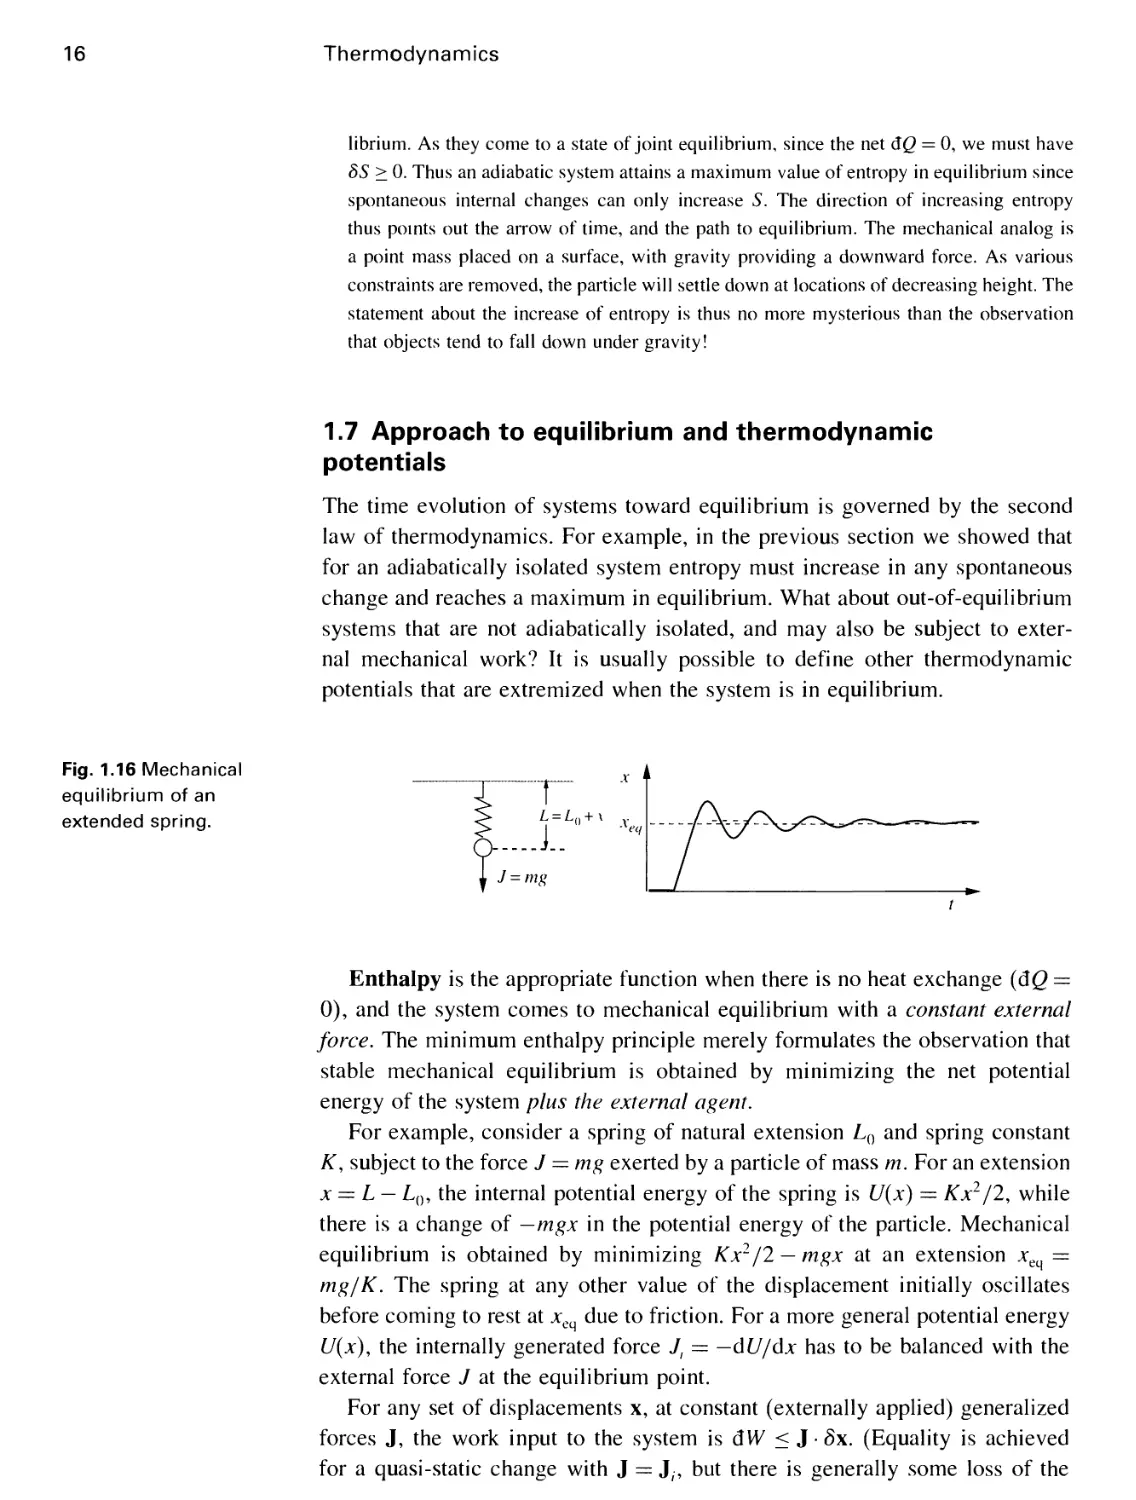 1.7 Approach to equilibrium and thermodynamic potentials